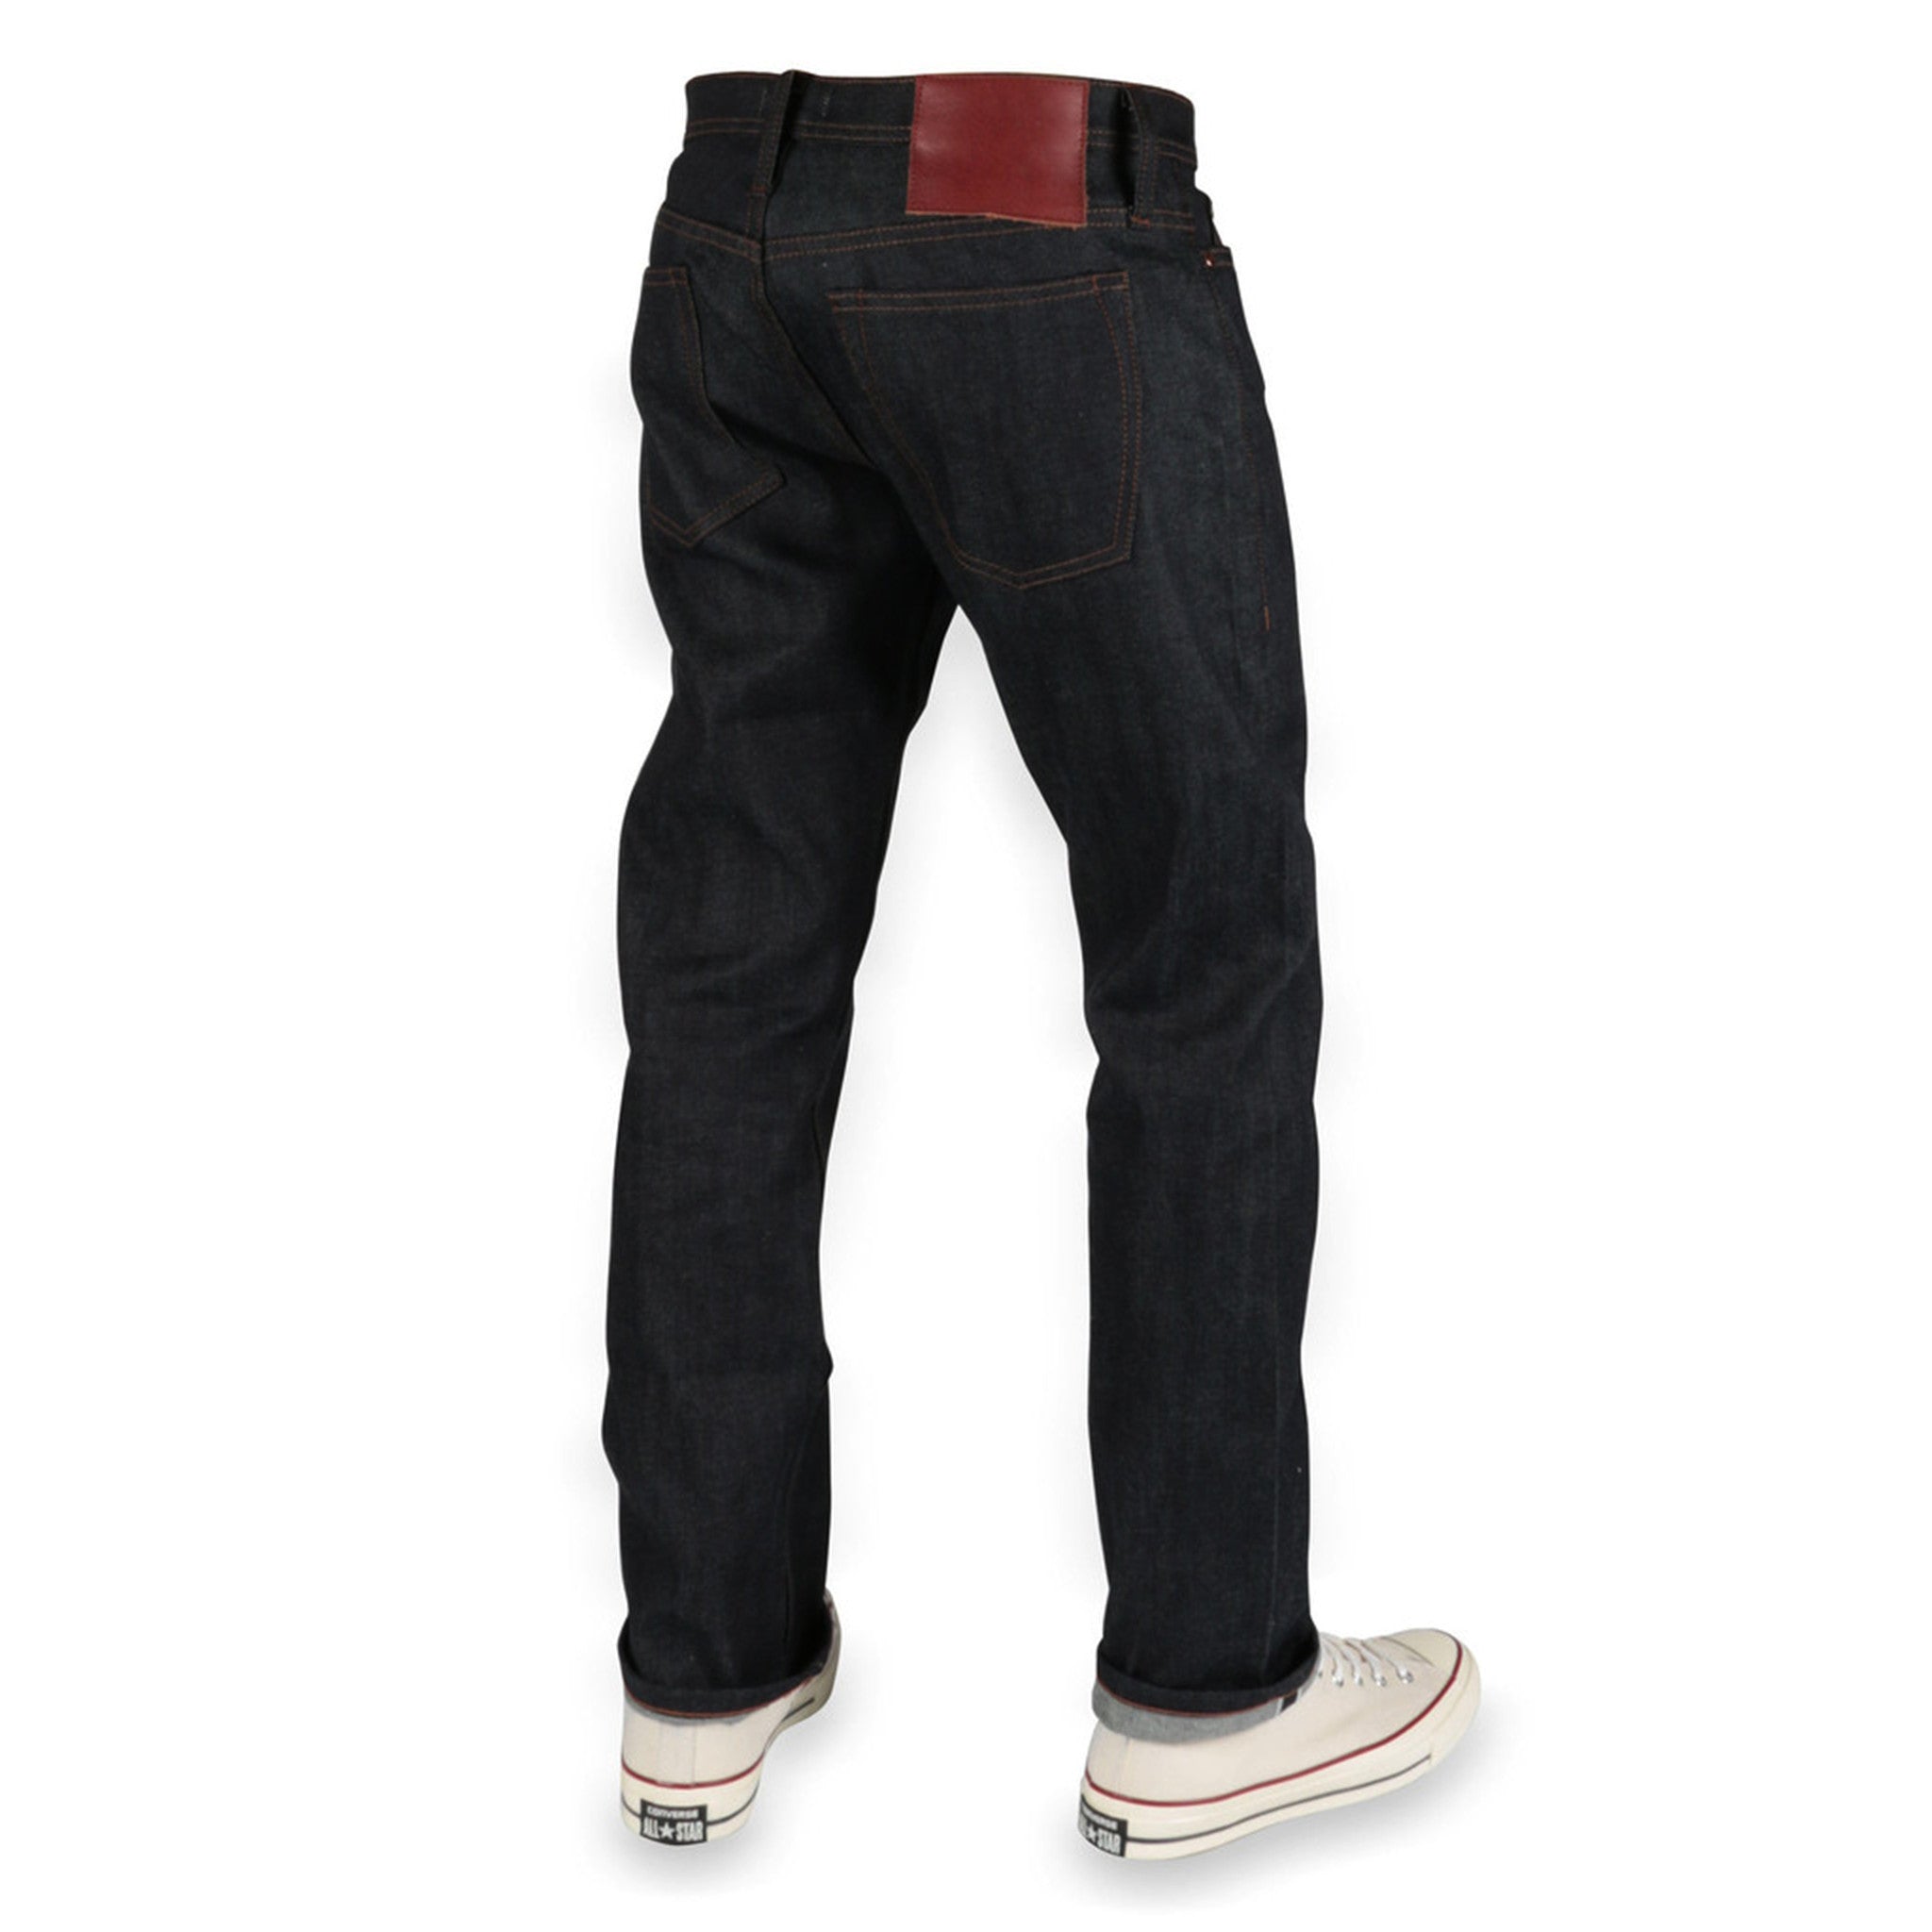 Unbranded Brand- UB222 Tapered Fit 11oz Stretch Selvedge